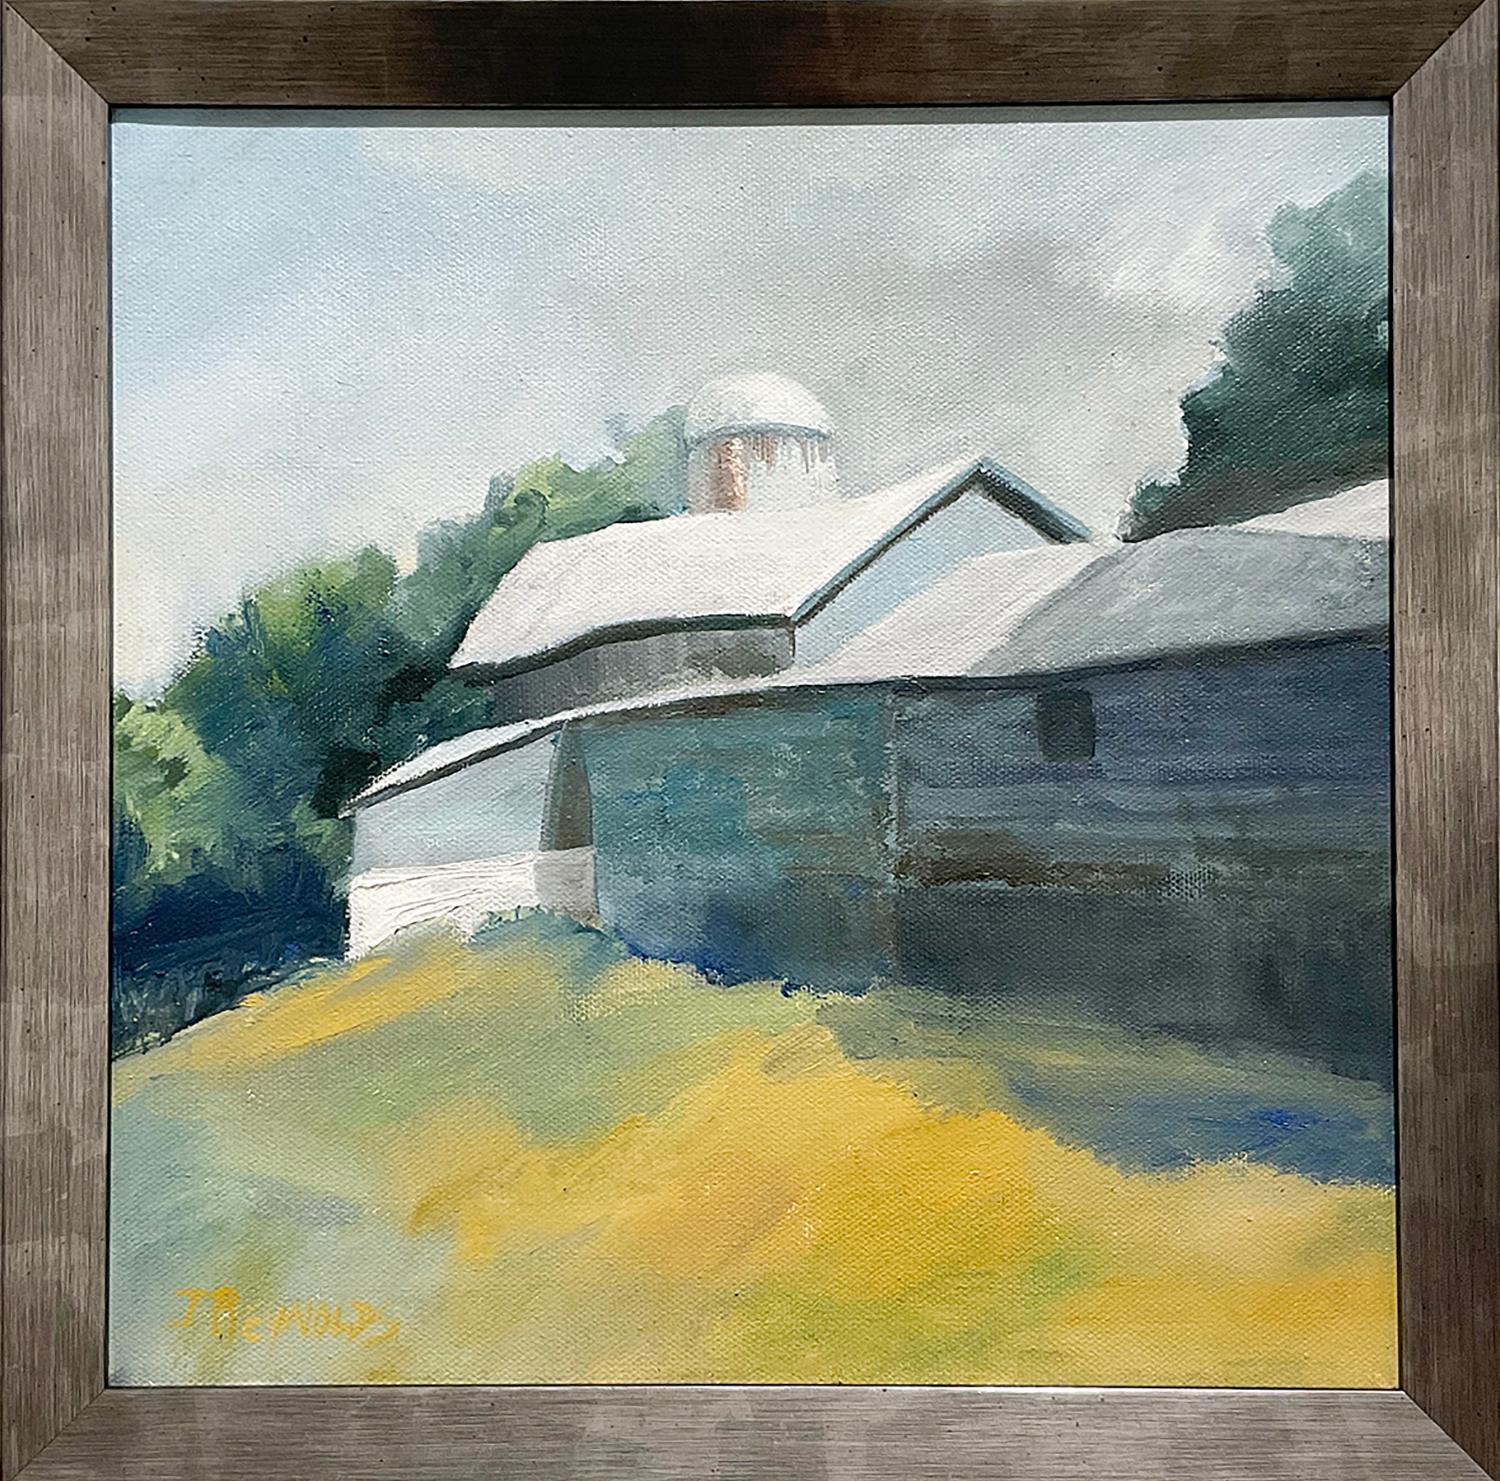 Blue Barn Summer (Contemporary Rural Landscape Painting, Oil on Canvas)